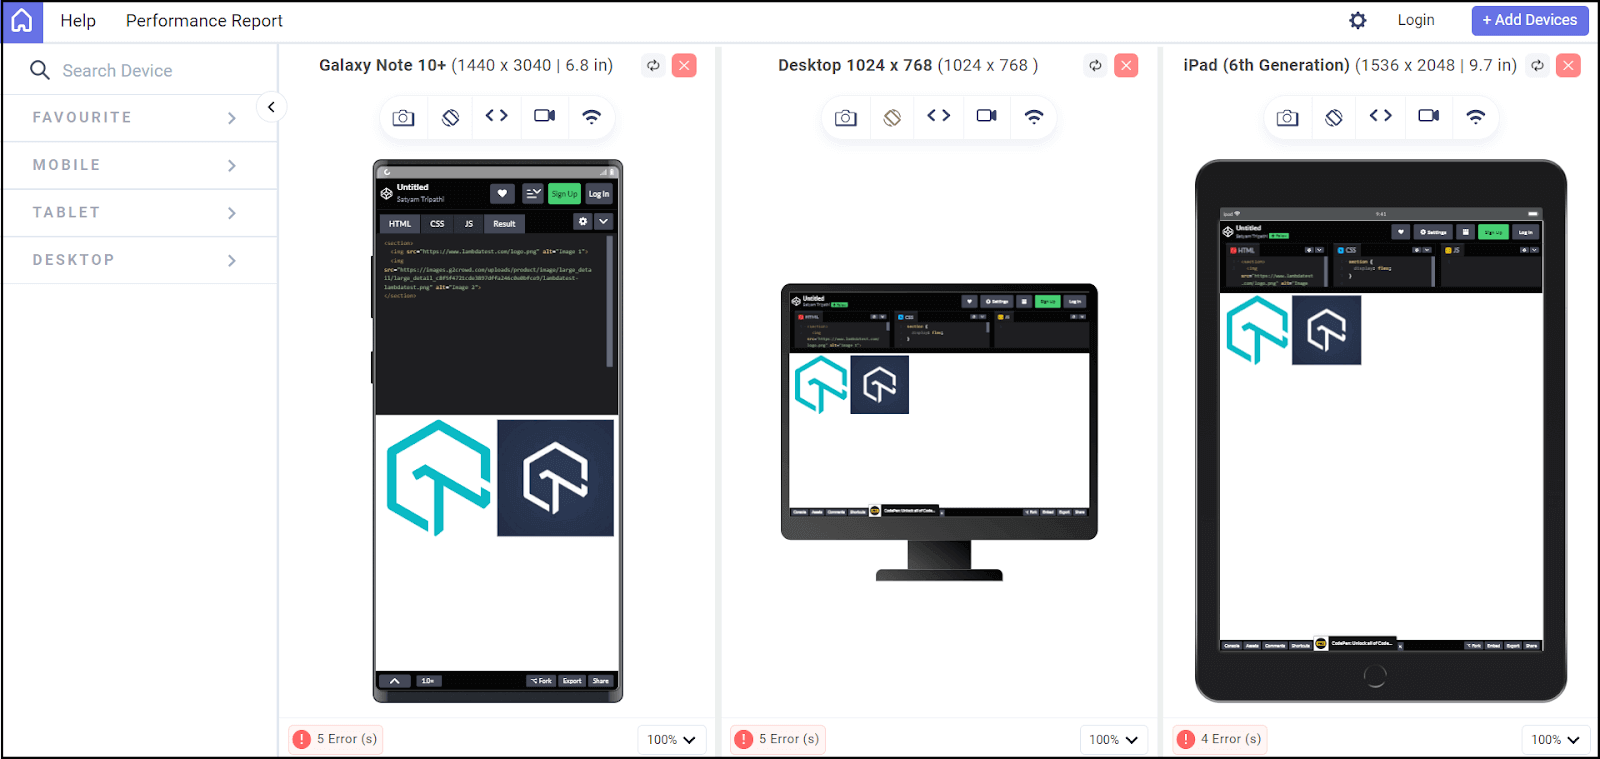 images are sized correctly for each screen